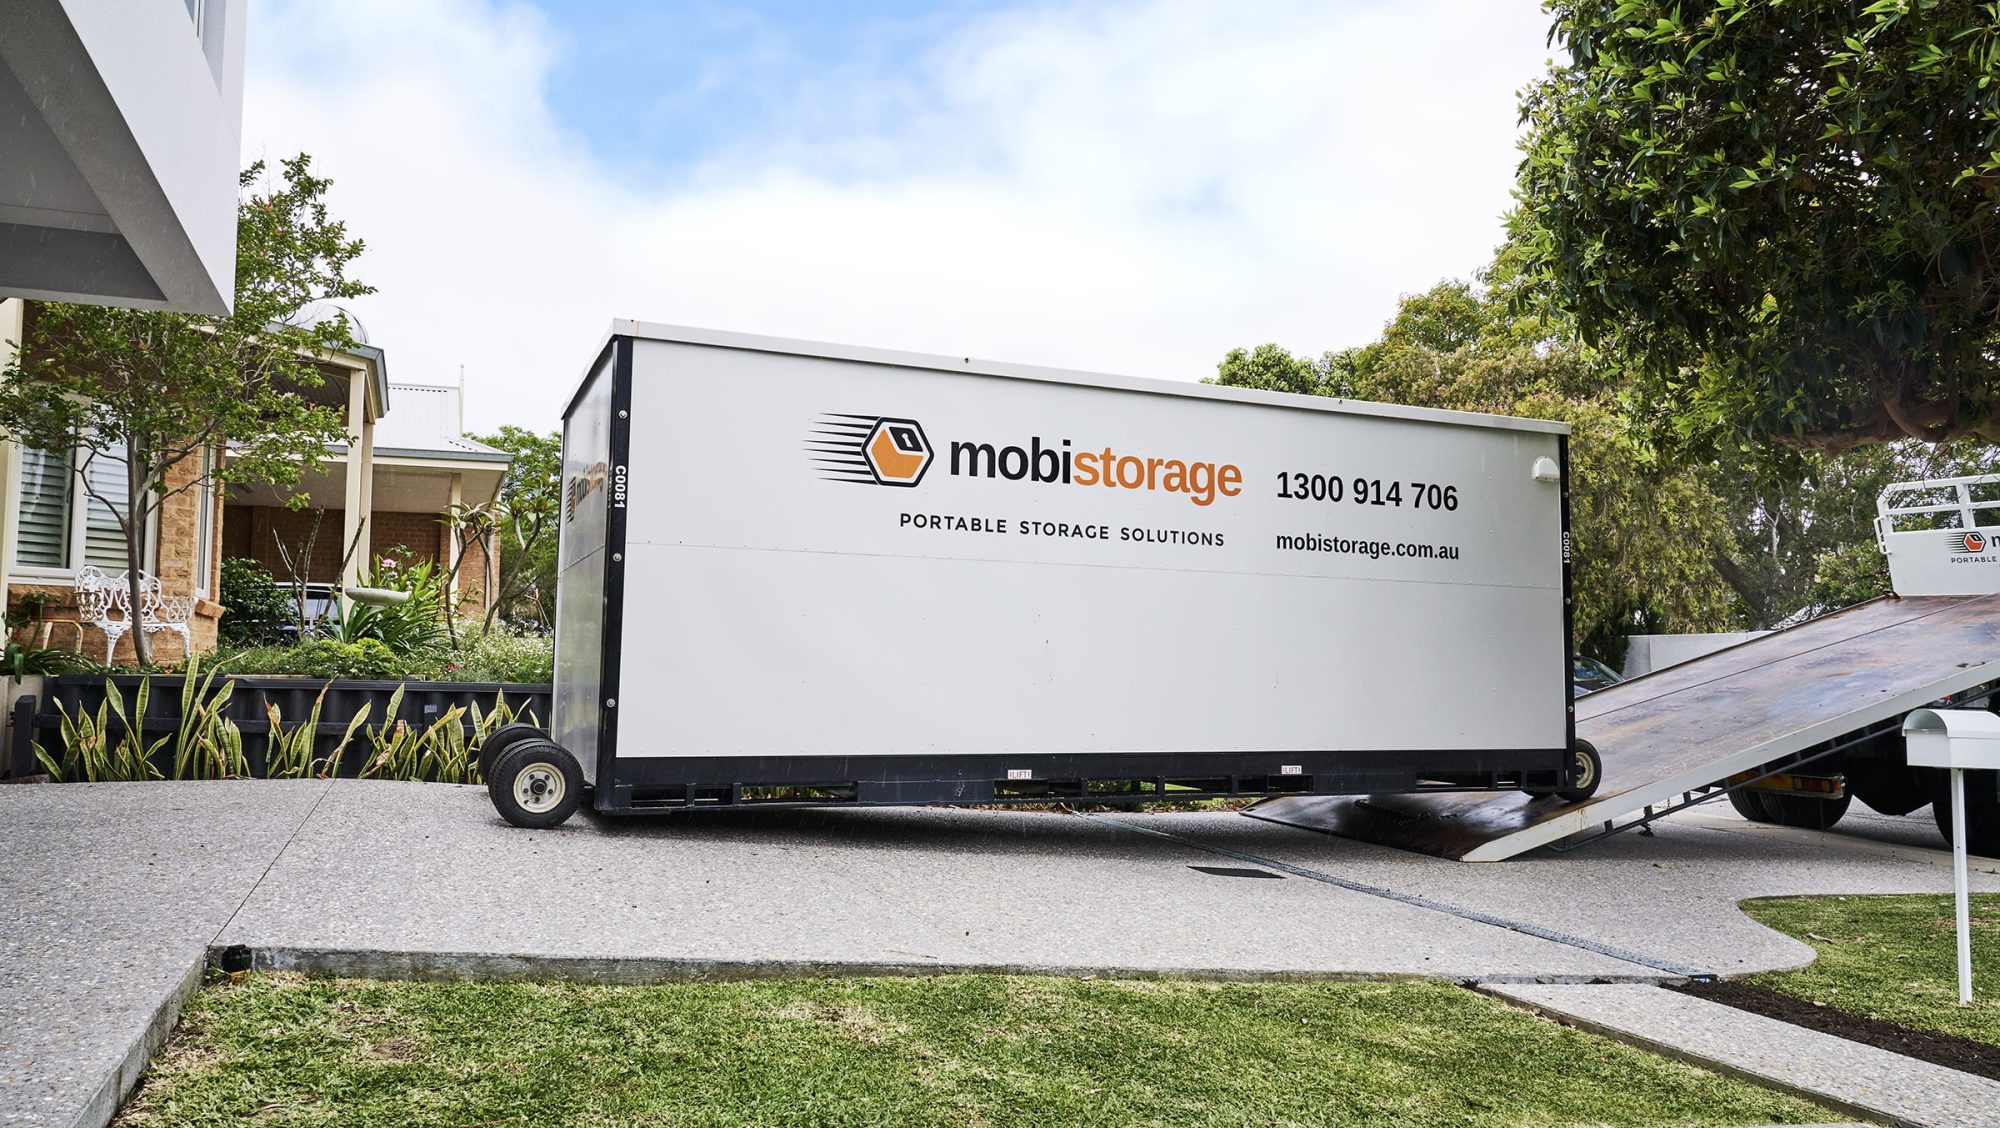 Loading a Mobistorage container